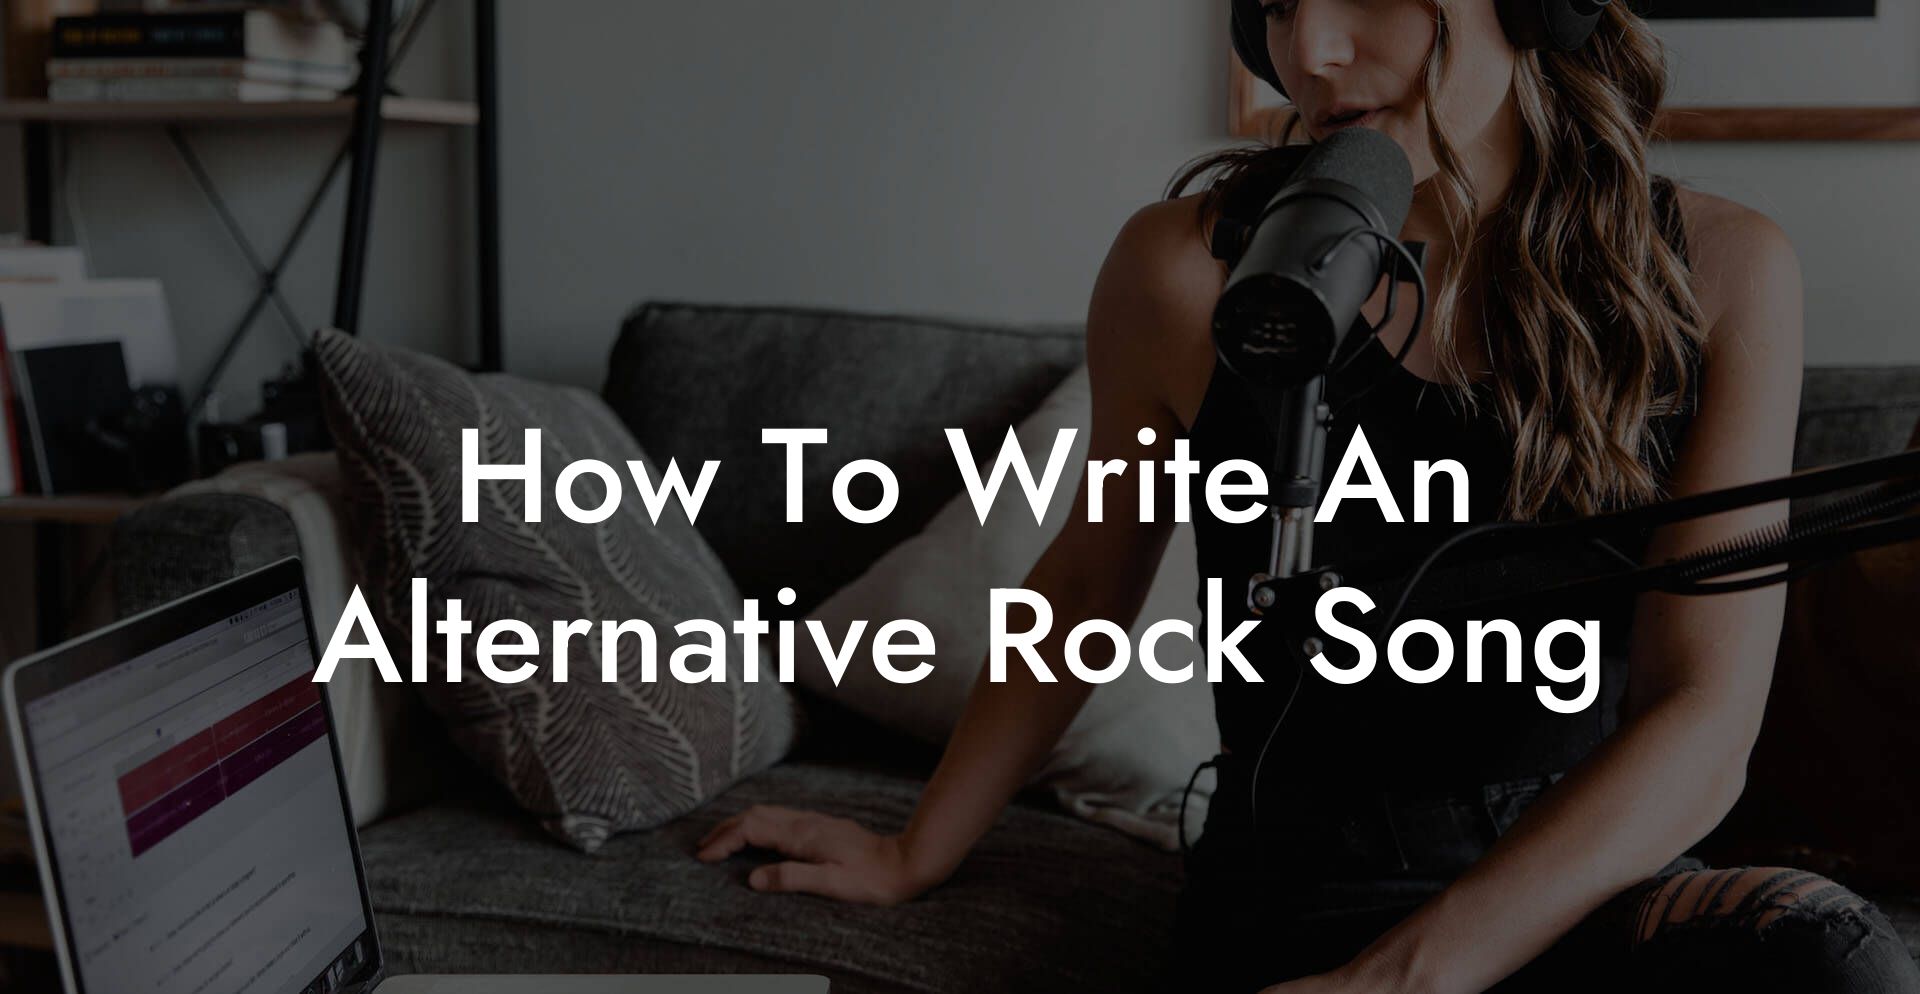 how to write an alternative rock song lyric assistant